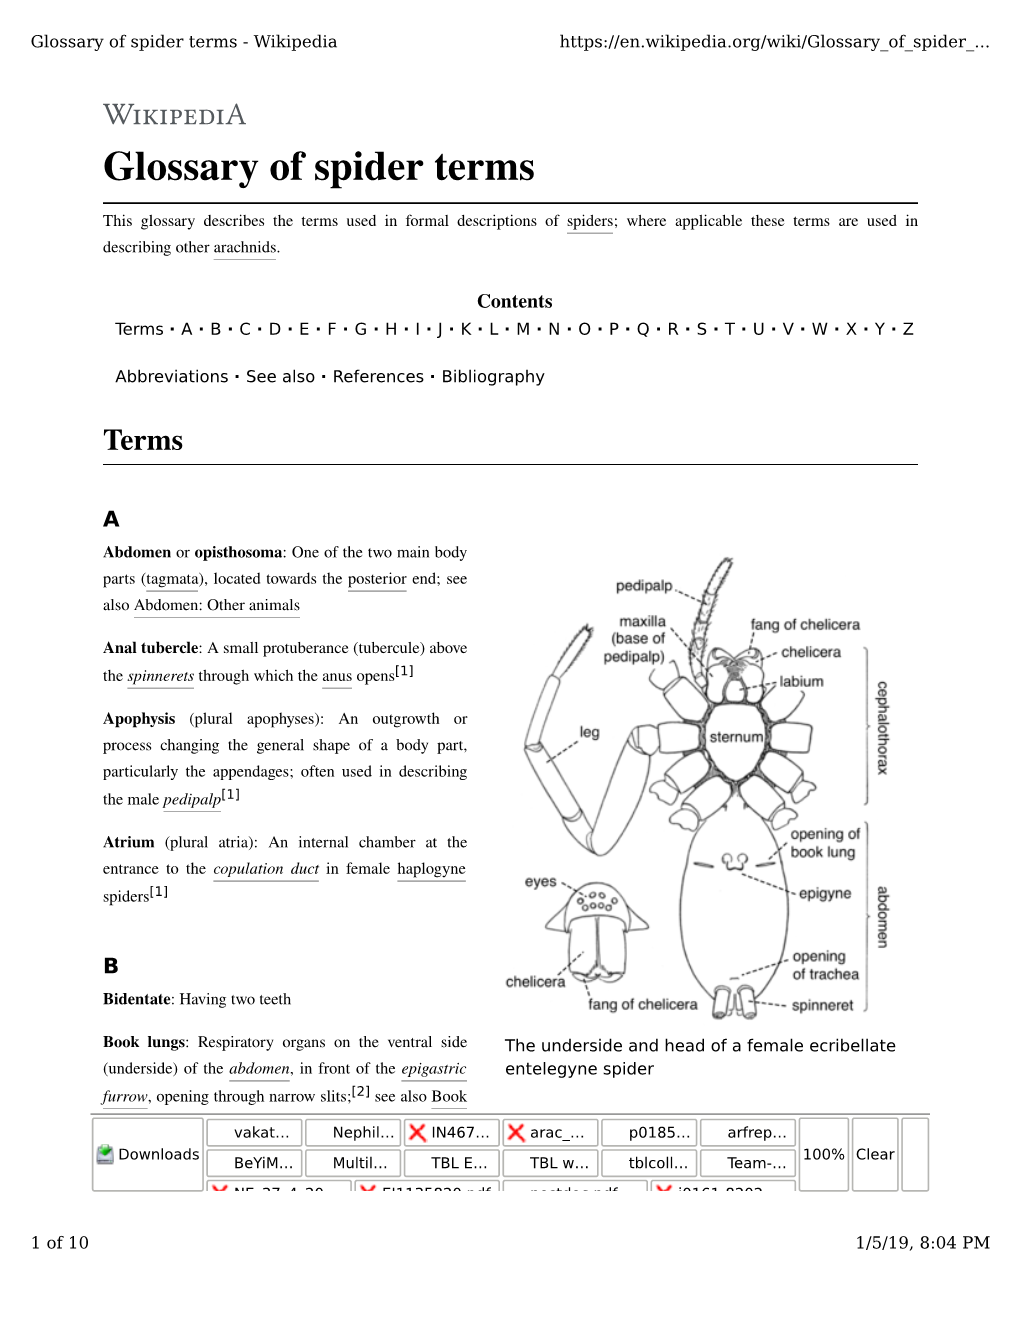 Glossary of Spider Terms - Wikipedia